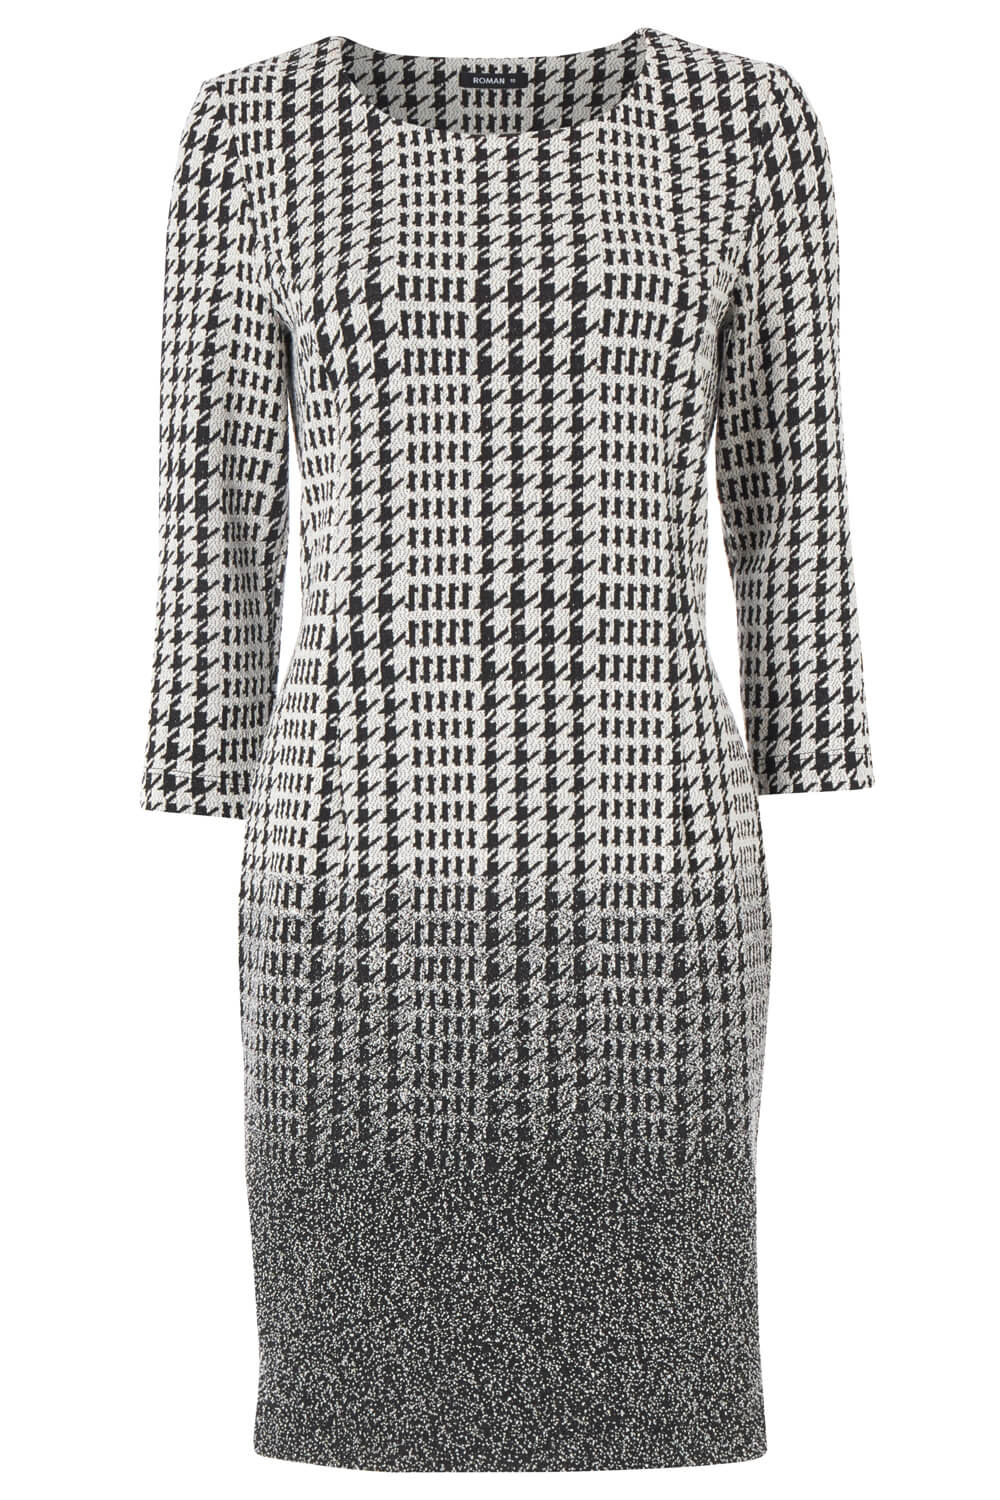 Dogtooth Check Ombre Textured Shift Dress in Black - Roman Originals UK